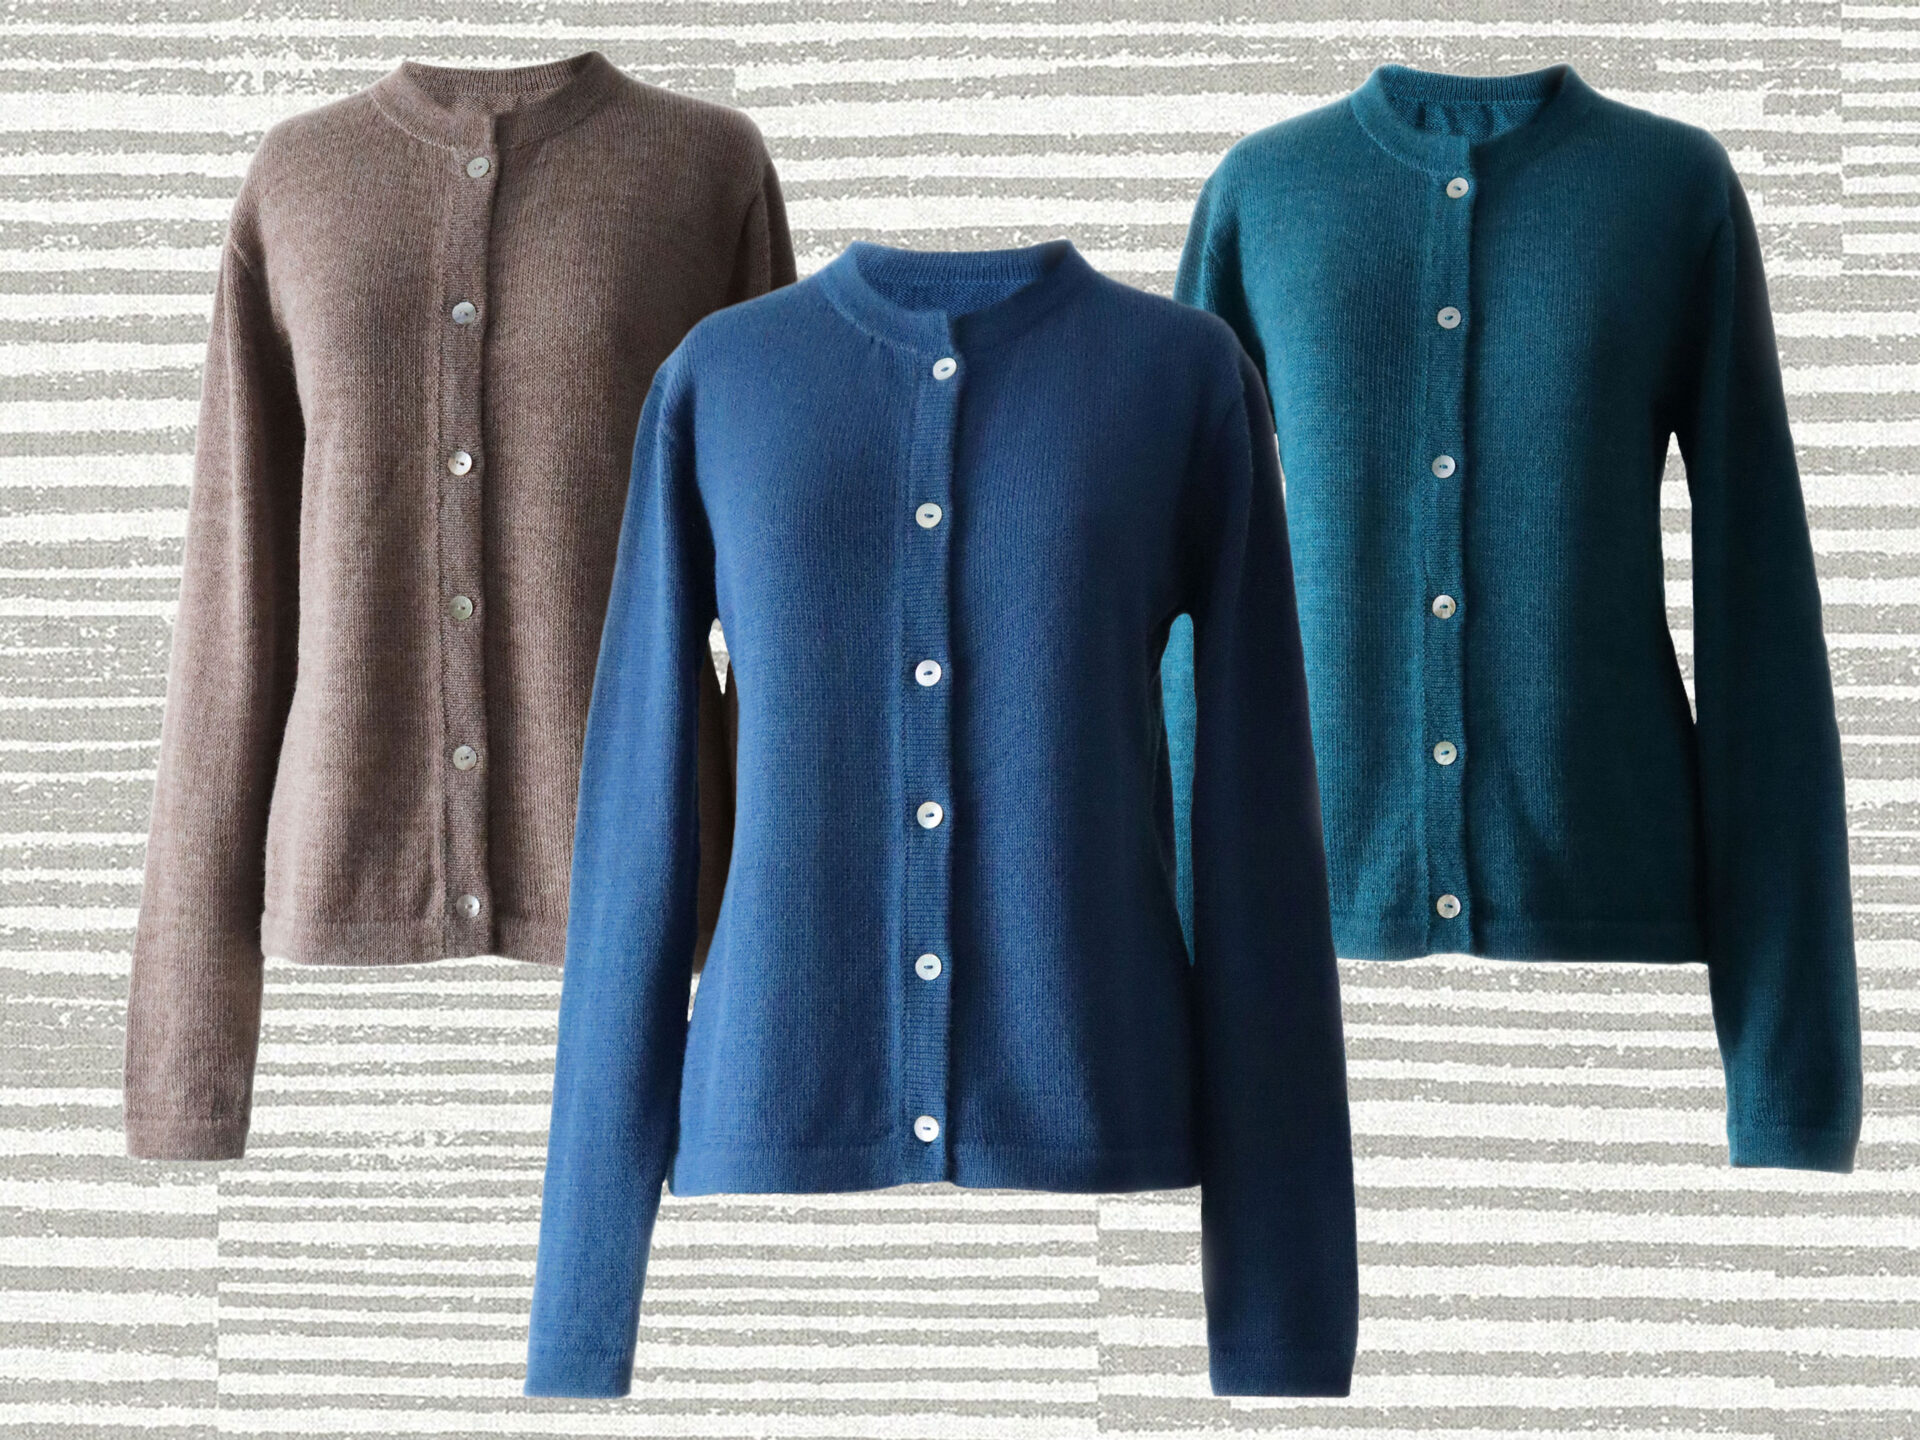 PopsFL knitwear Classic cardigan with button closure and crew neck